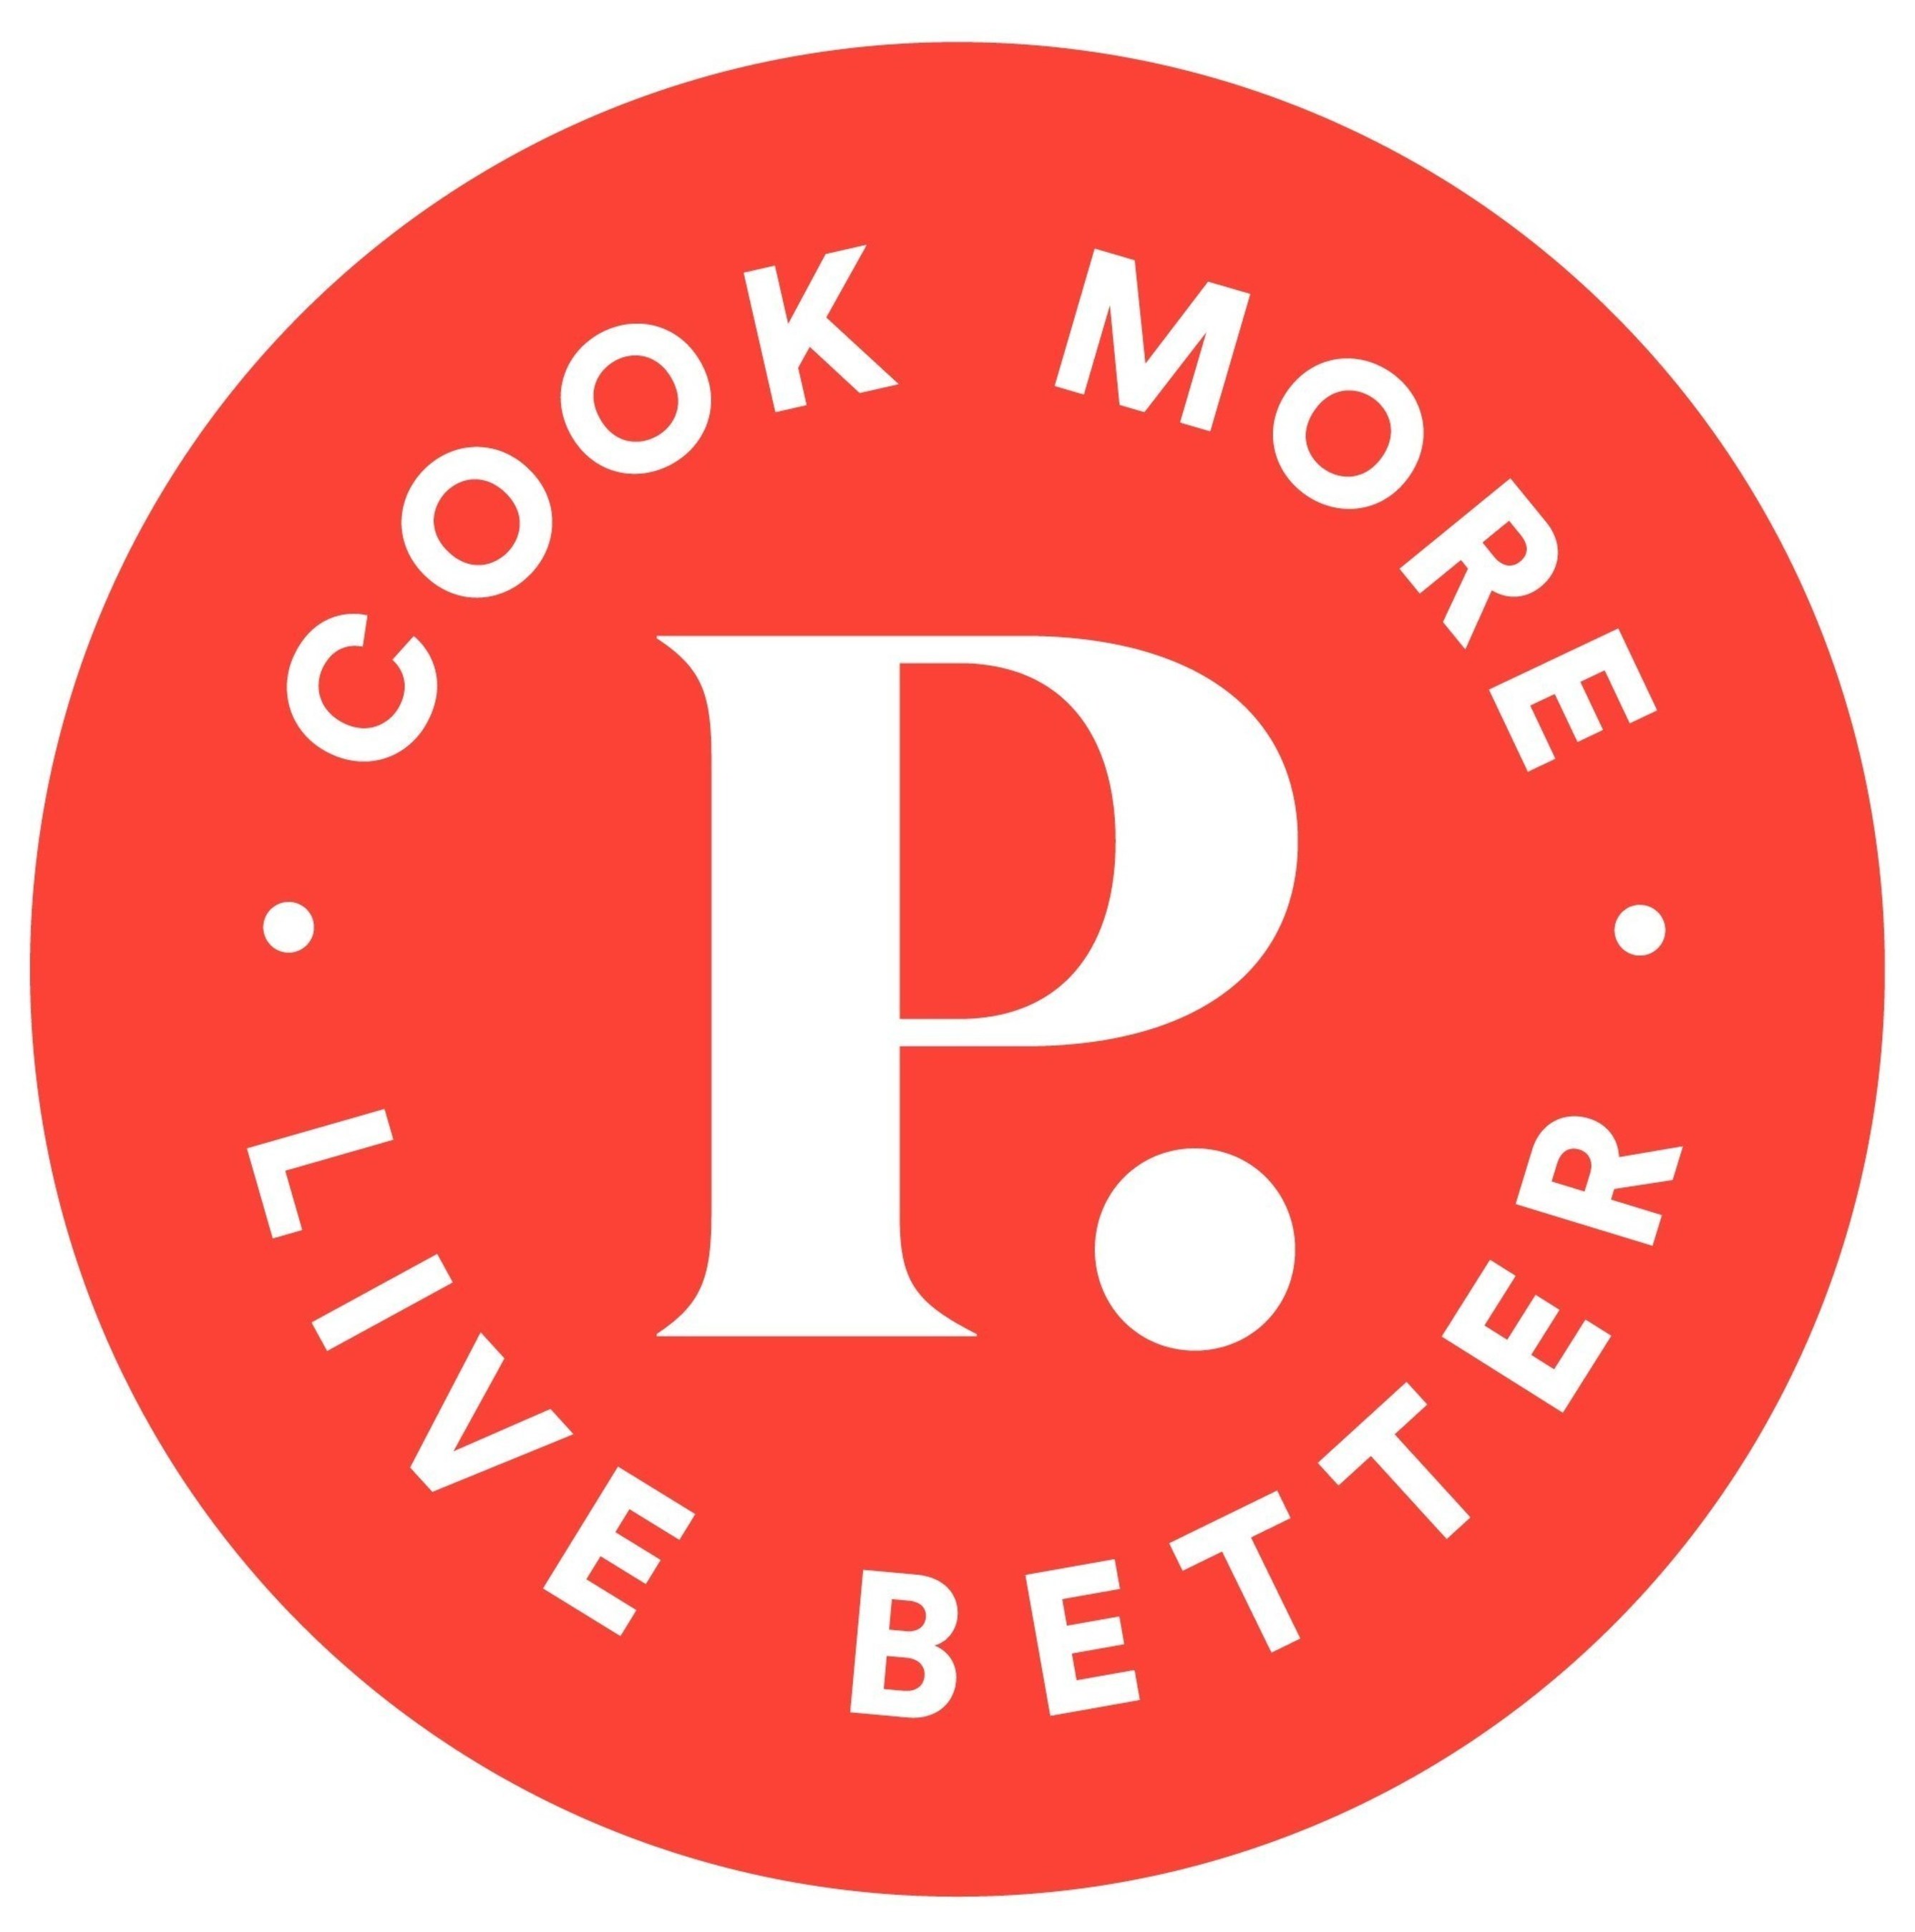 Plated is the premium meal kit service that delivers everything you need to create the personal dinner experiences you crave. (PRNewsFoto/Plated) (PRNewsFoto/Plated)